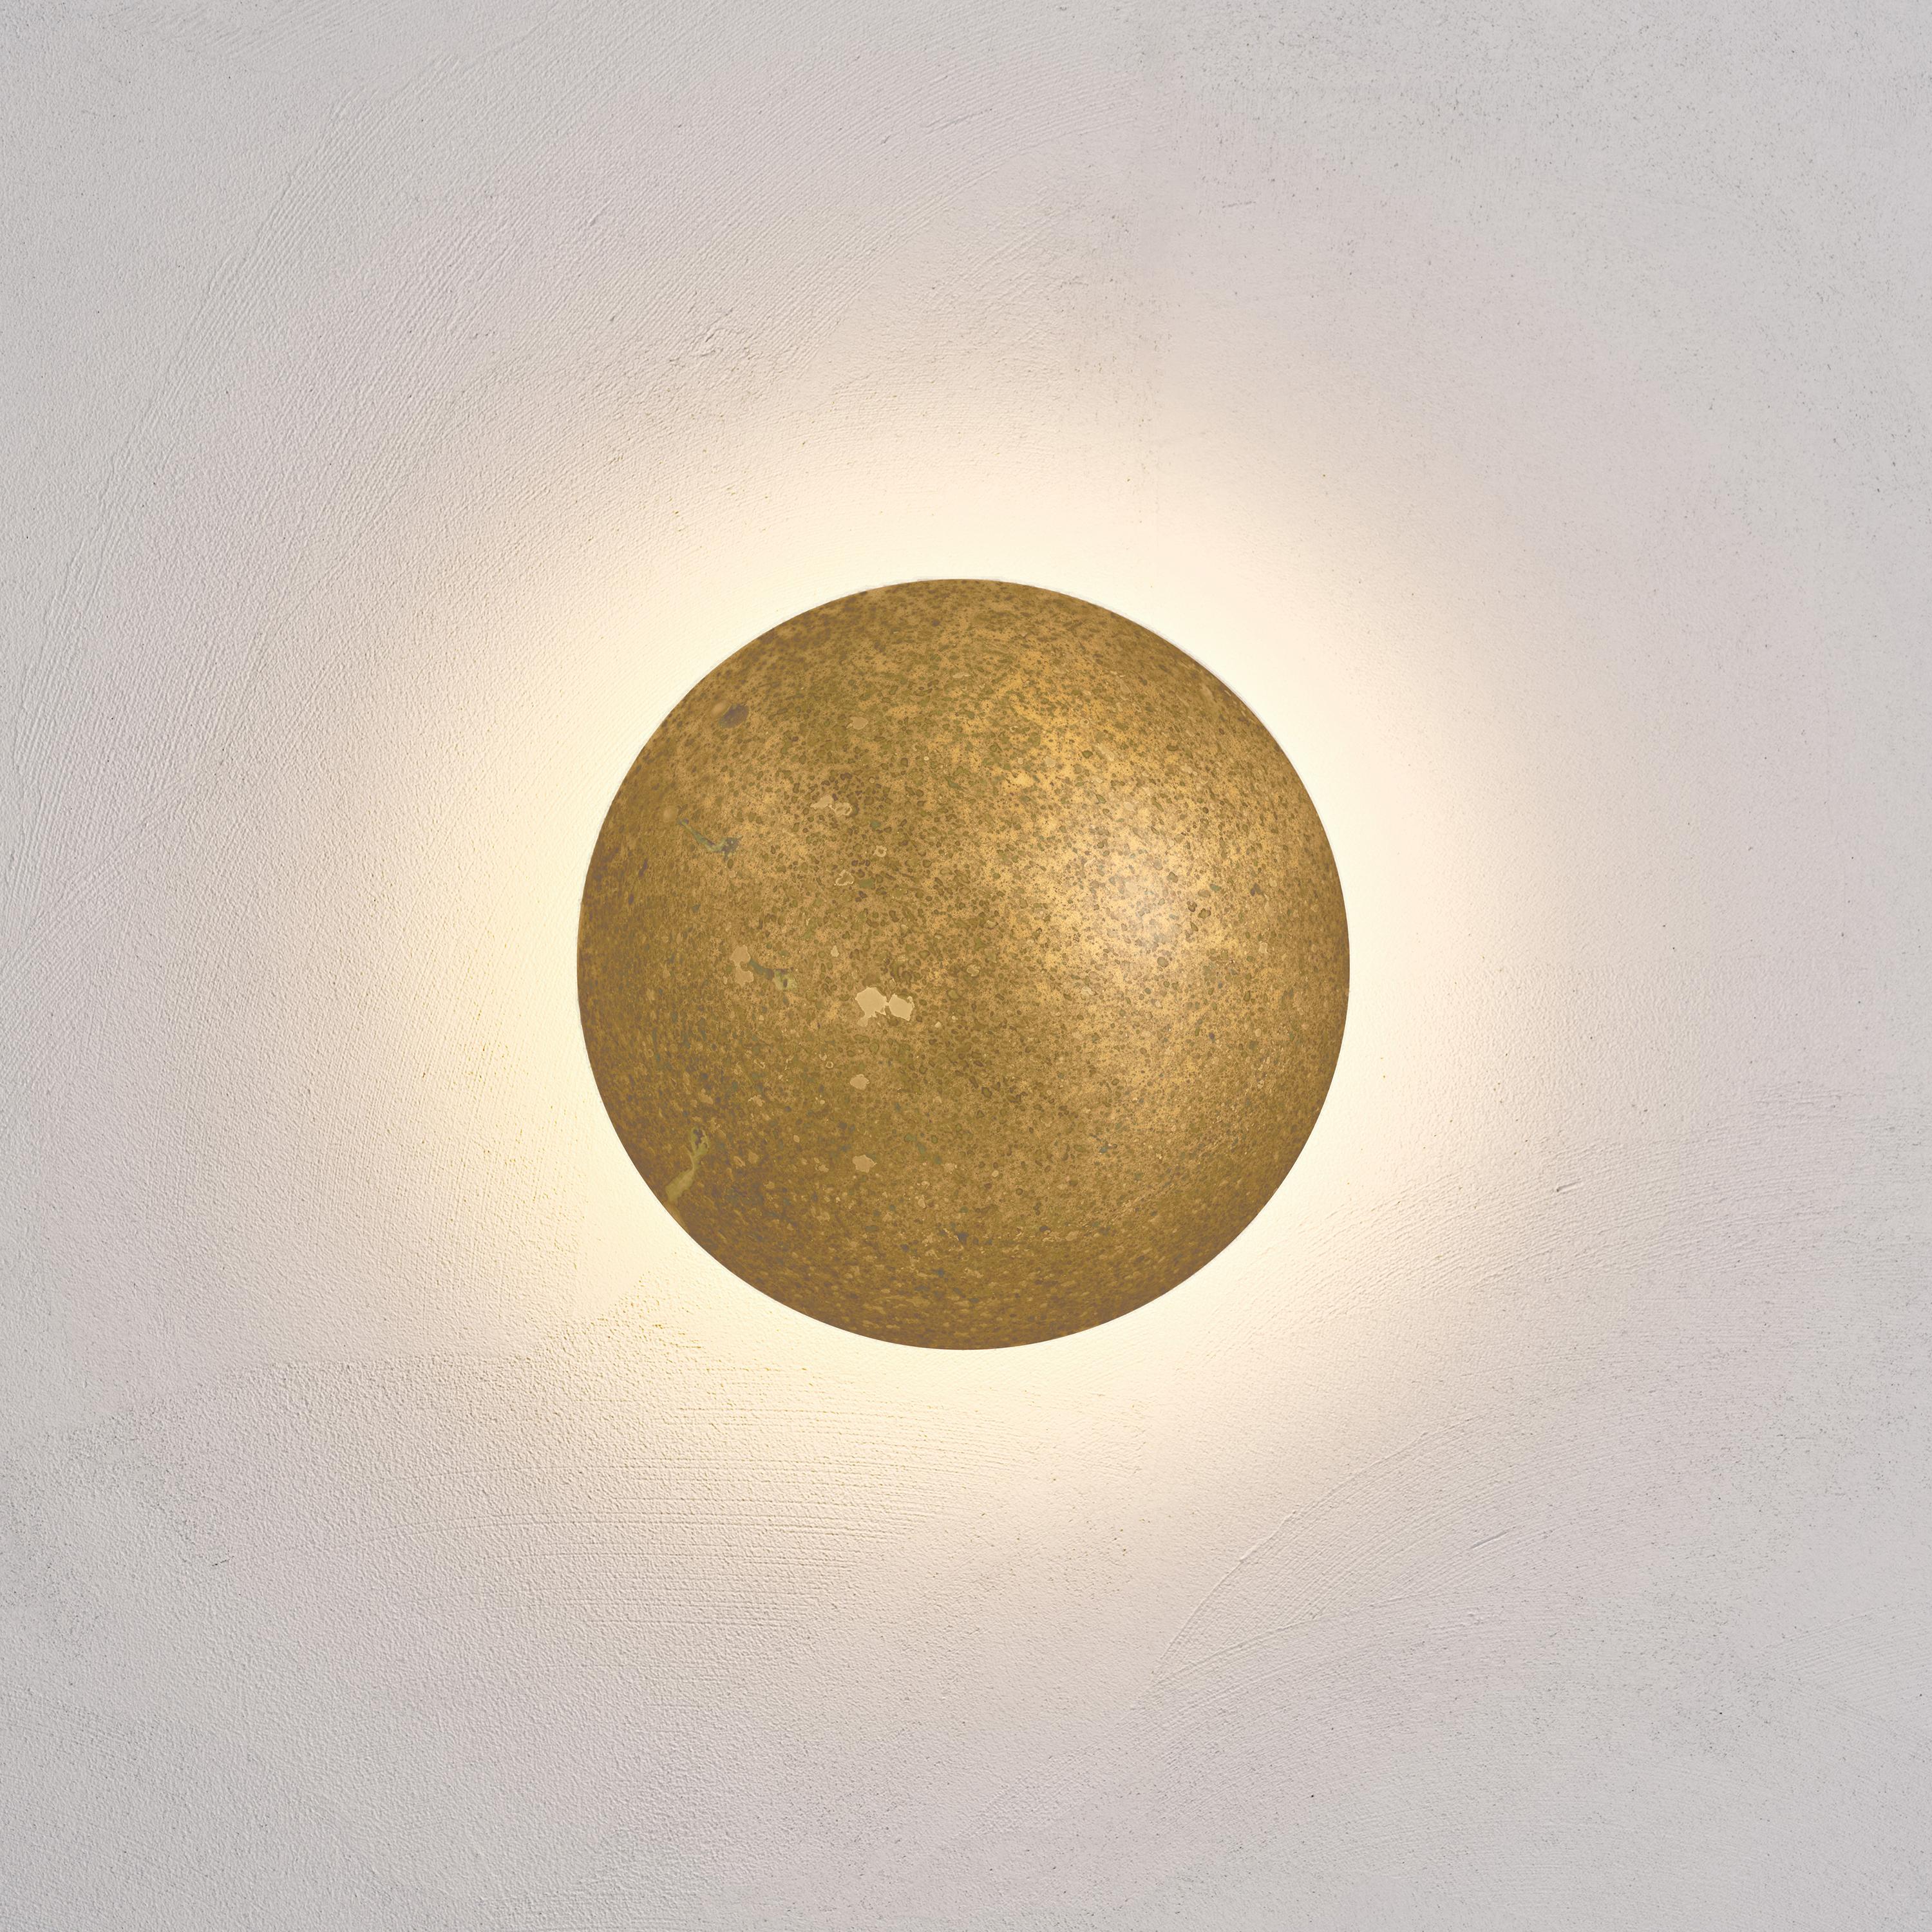 Cosmic 'Comet Oxidium 26' hand-crafted oxidised patinated brass wall Light, Sconce

Named after the astronomical object that signals a rebirth and new ideas, the ‘Comet’ pieces are achieved with skilful brass shaping and patina finishes that